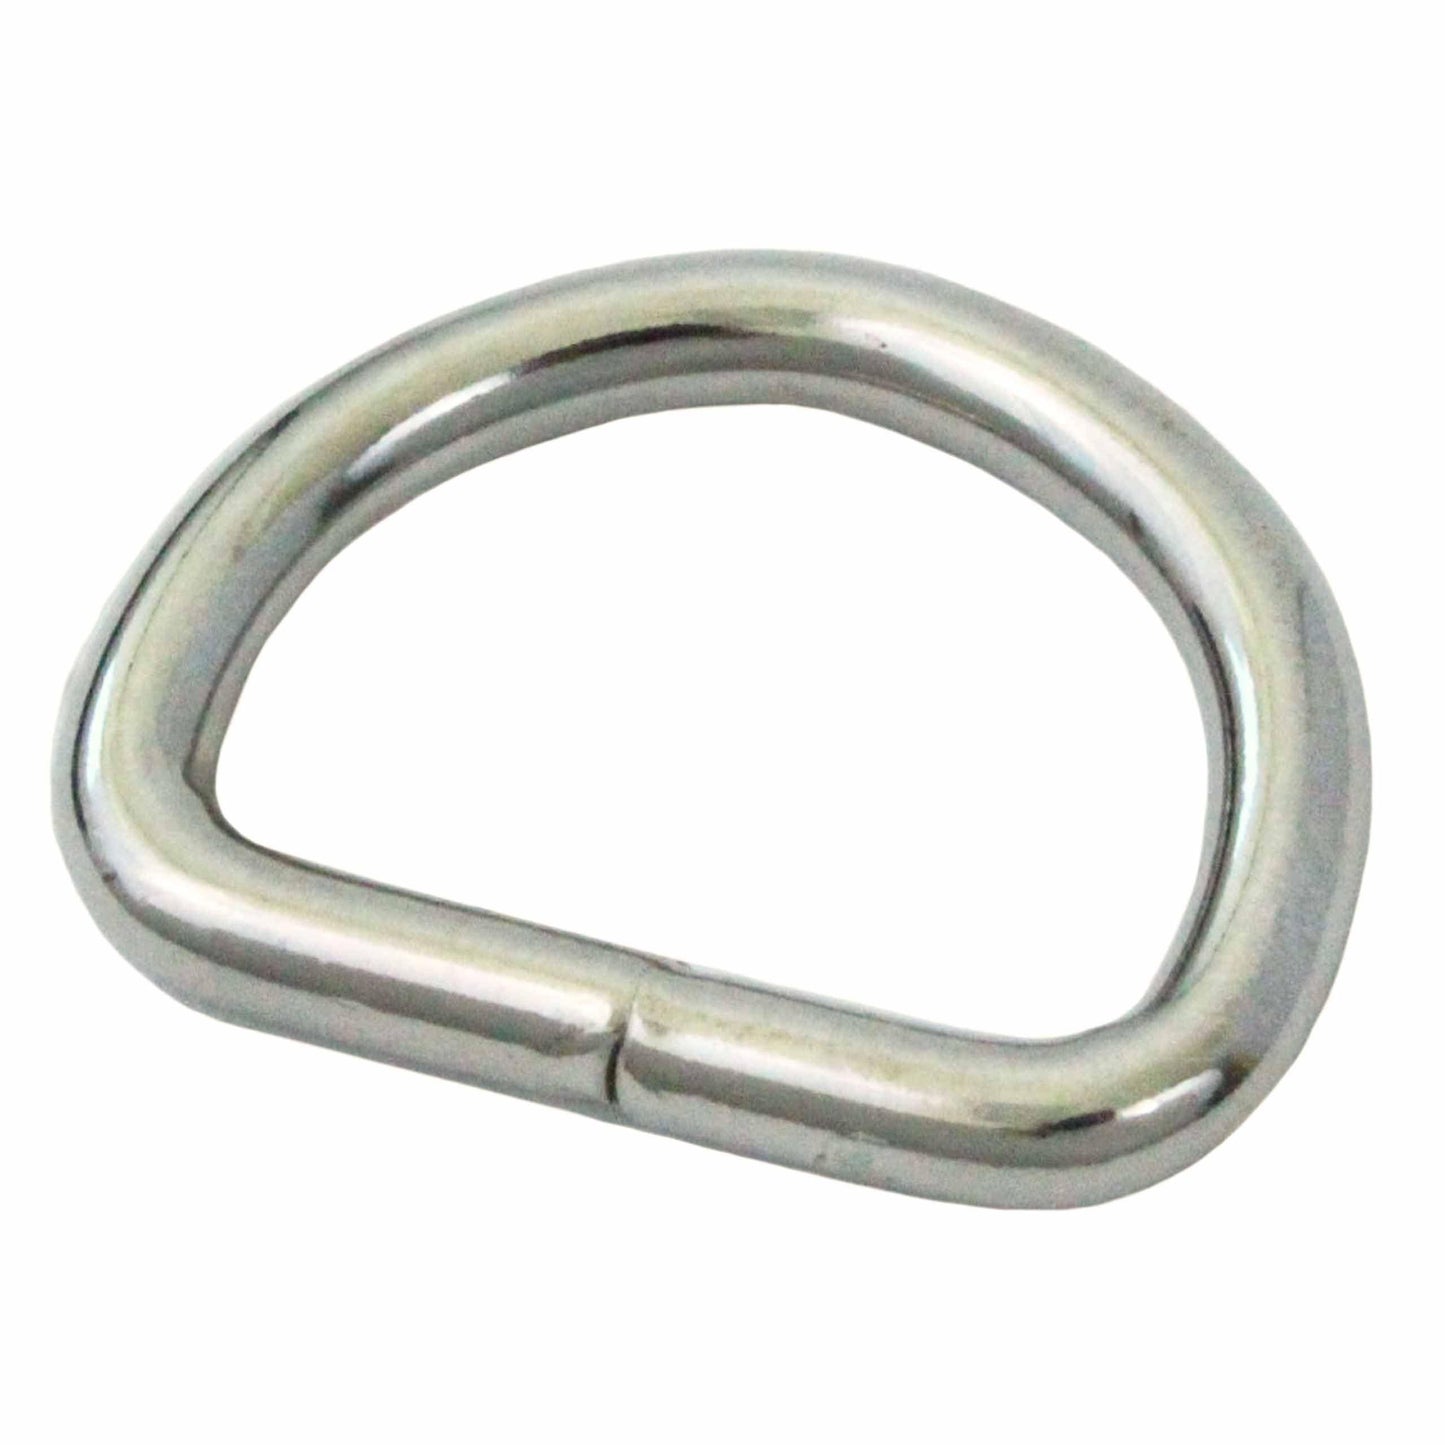 10 Pieces of Nickel Plated D Rings - Boxer Tools